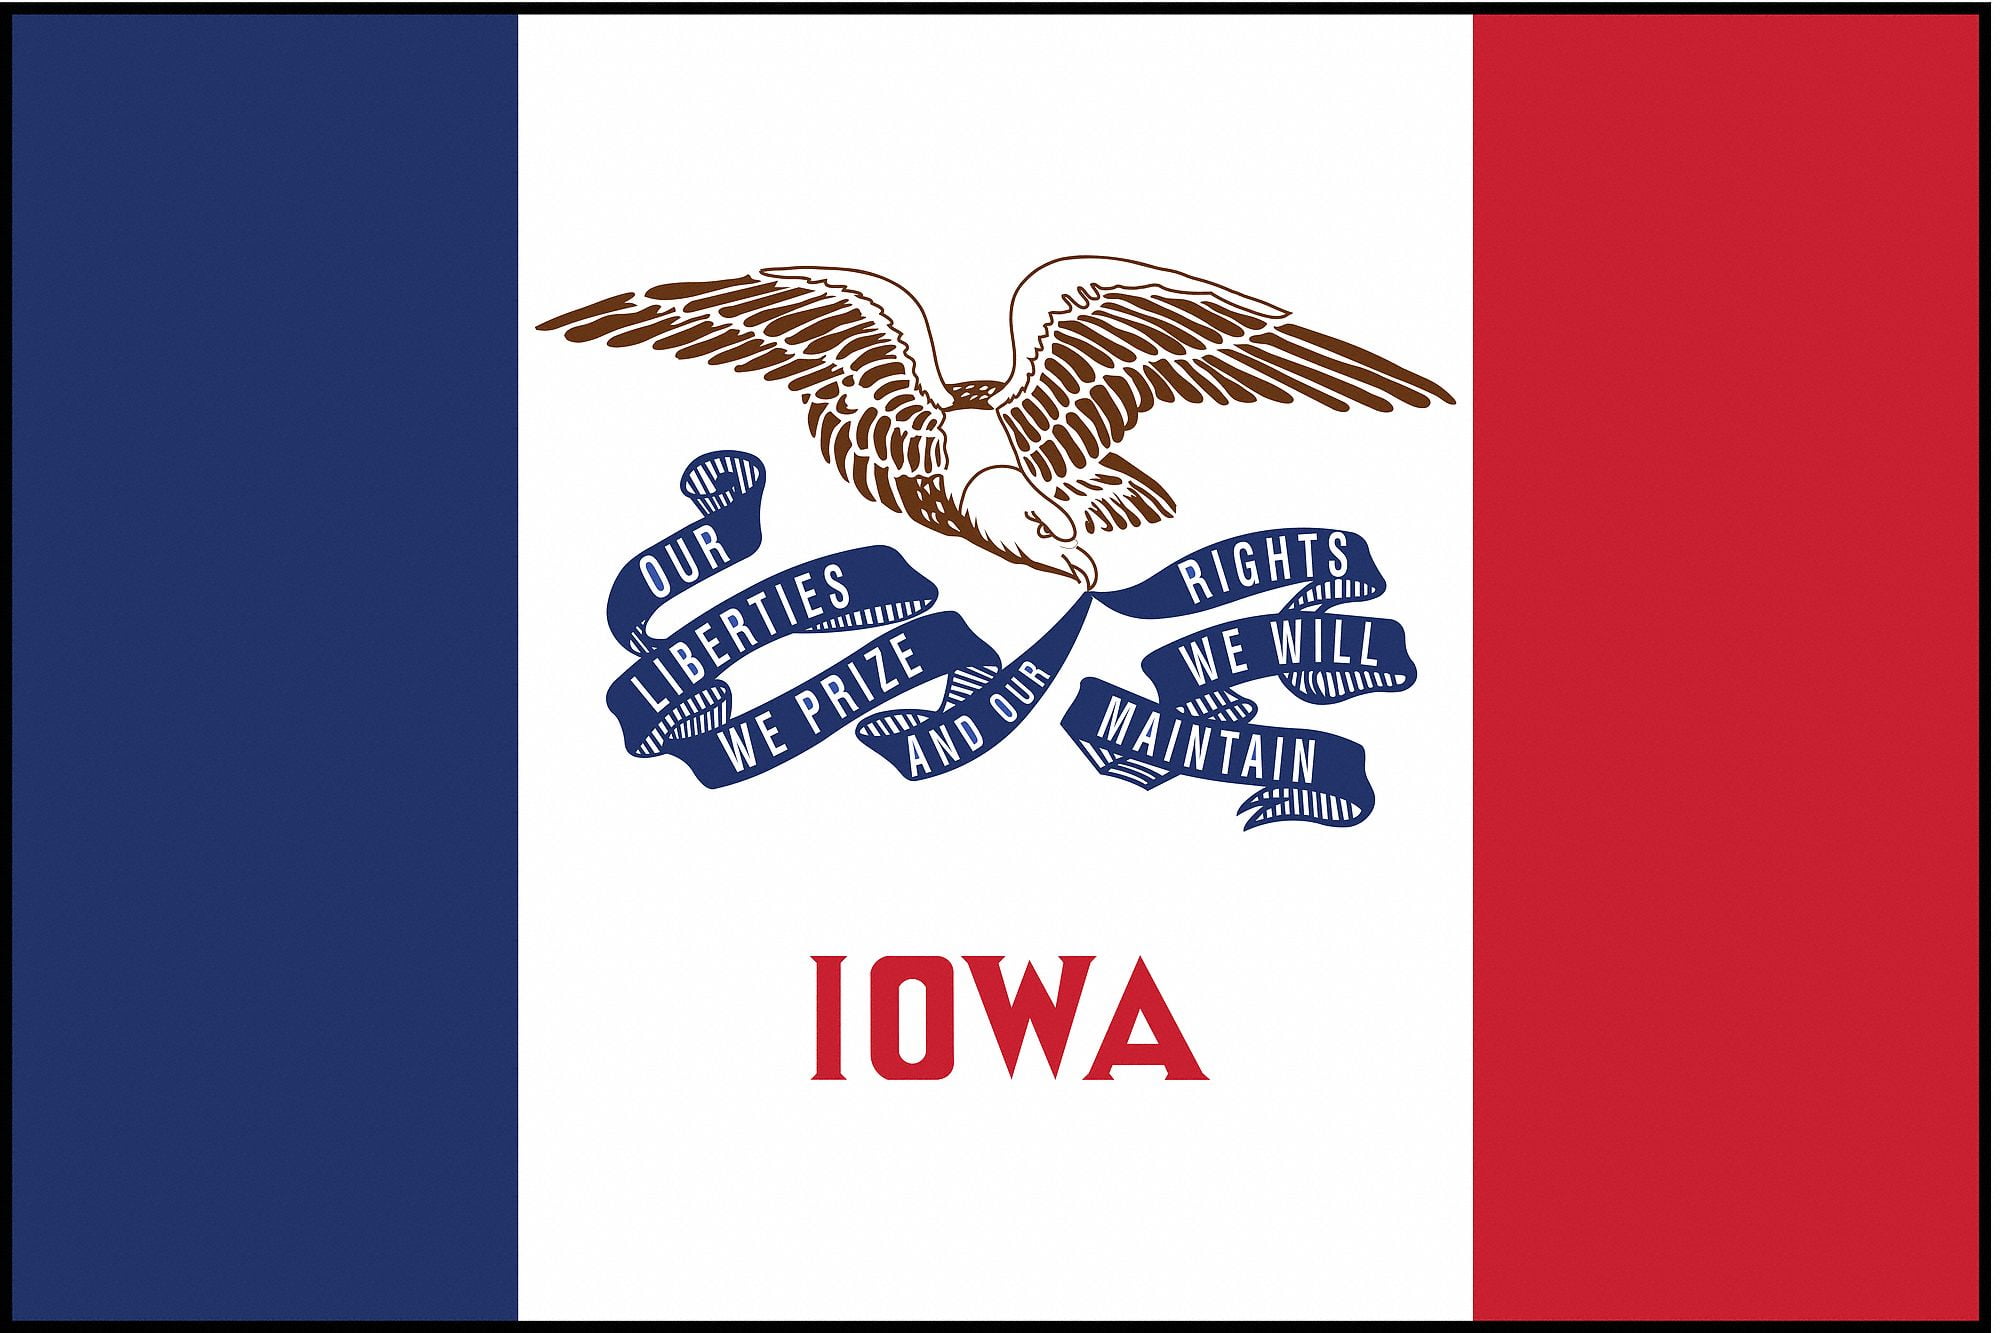 3x5 Iowa Flag State of Iowa Banner Polyester Grommets Quality  FAST USA SHIP 